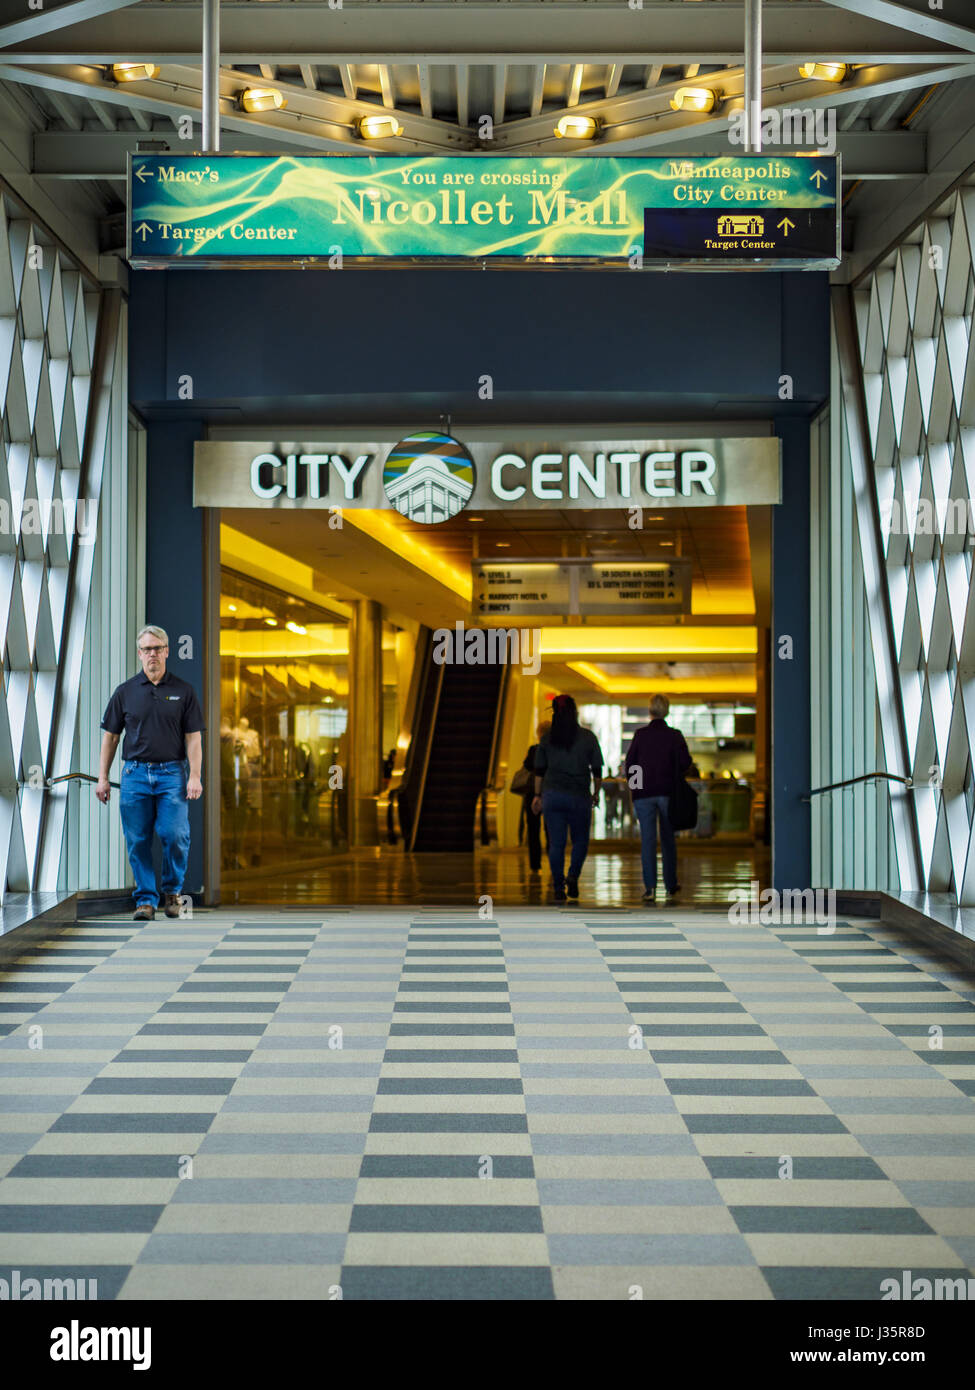 May 3, 2017 - Minneapolis, Minnesota, U.S - The skyway going into City Center in Minneapolis. The skyways are enclosed pedestrian overpasses that connect downtown buildings. The Minneapolis Skyway was started in the early 1960s as a response to covered shopping malls in the suburbs that were drawing shoppers out of the downtown area. The system grew sporadically until 1974, when the construction of the IDS Center and its center atrium, called the Crystal Court, served as a hub for the downtown skyway system. There are 8 miles of skyways, connecting most of the downtown buildings from Target Fi Stock Photo